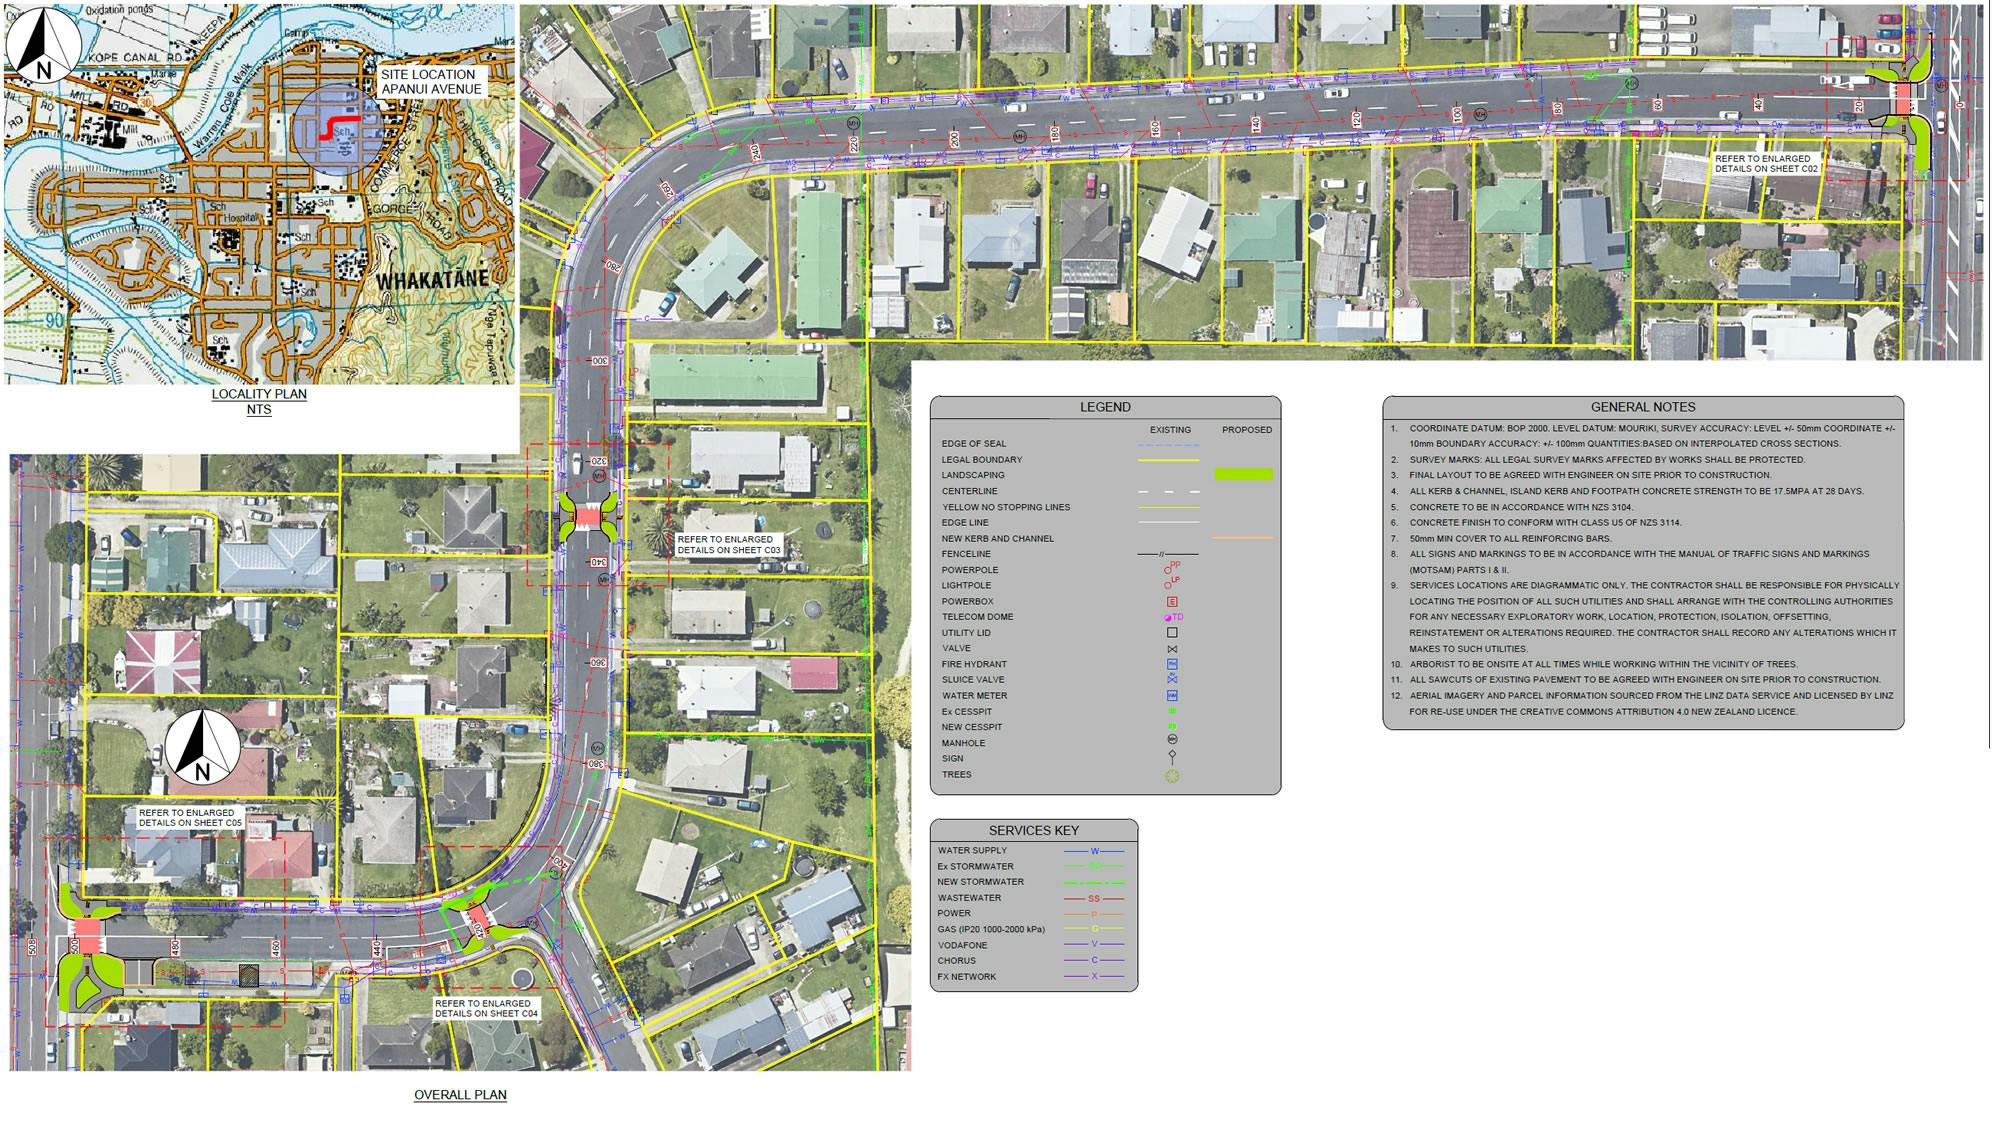 Overall Plan of Apanui Ave area